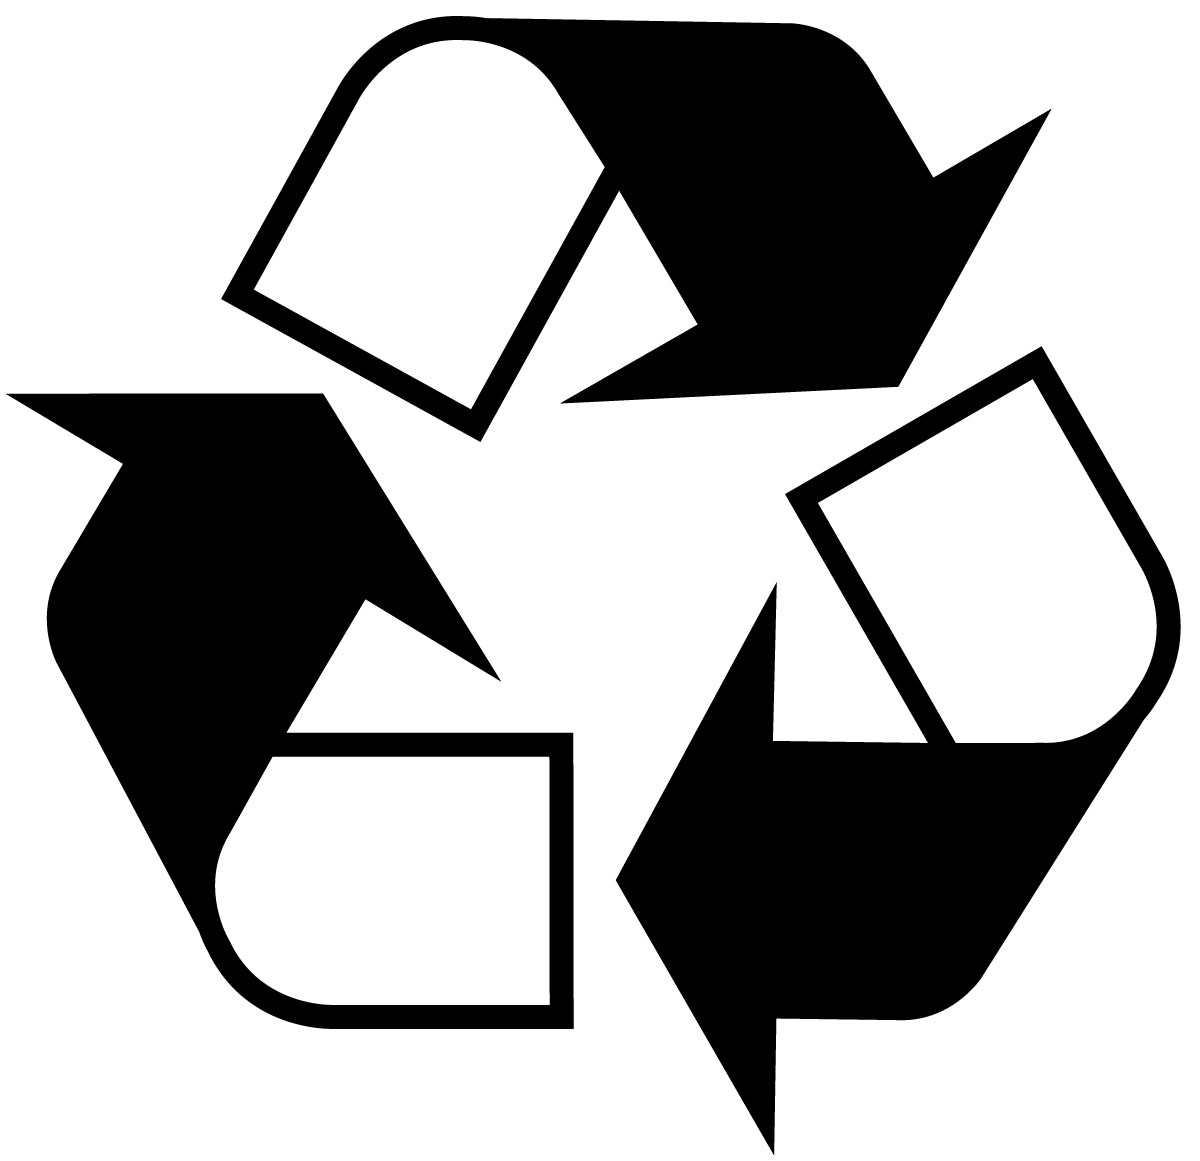 Printable Recycle Symbol - ClipArt Best